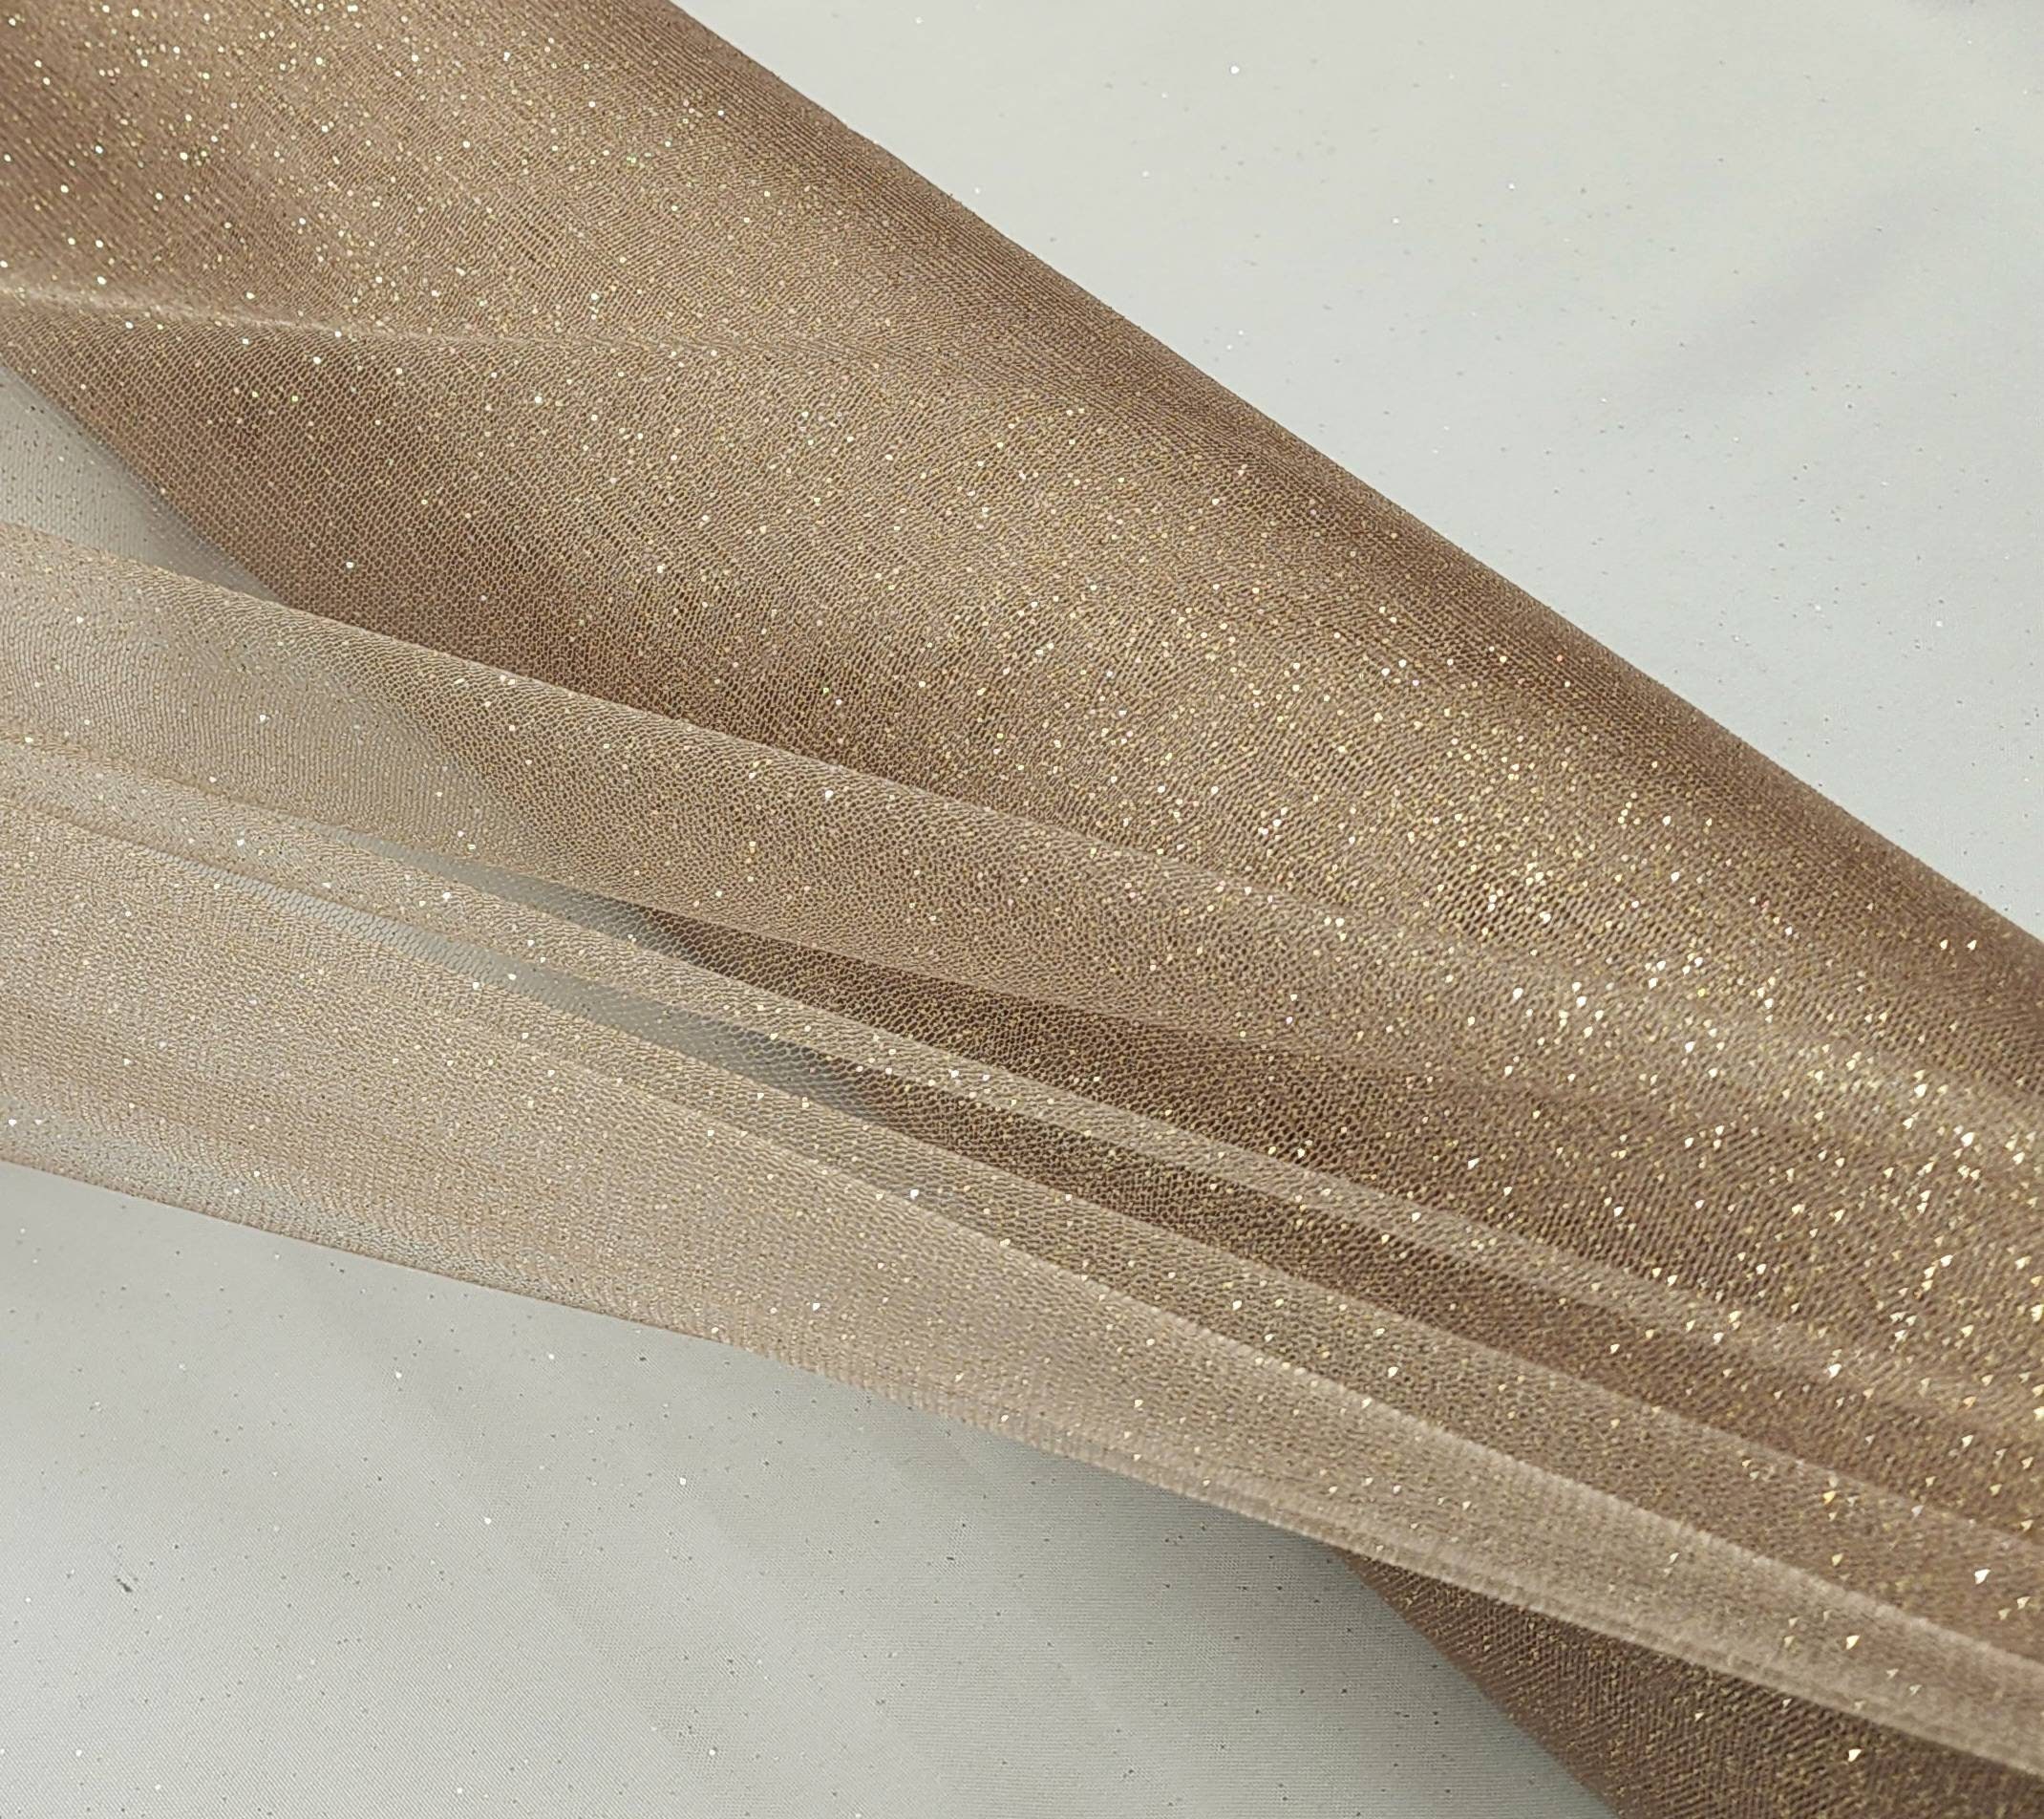 New Gold Color Shimmer Glitter Tulle Fabric by the Yard, Stardust Glitter  Fabric twinkles by Secret Spark, DIY Gold Glitter for Dresses 